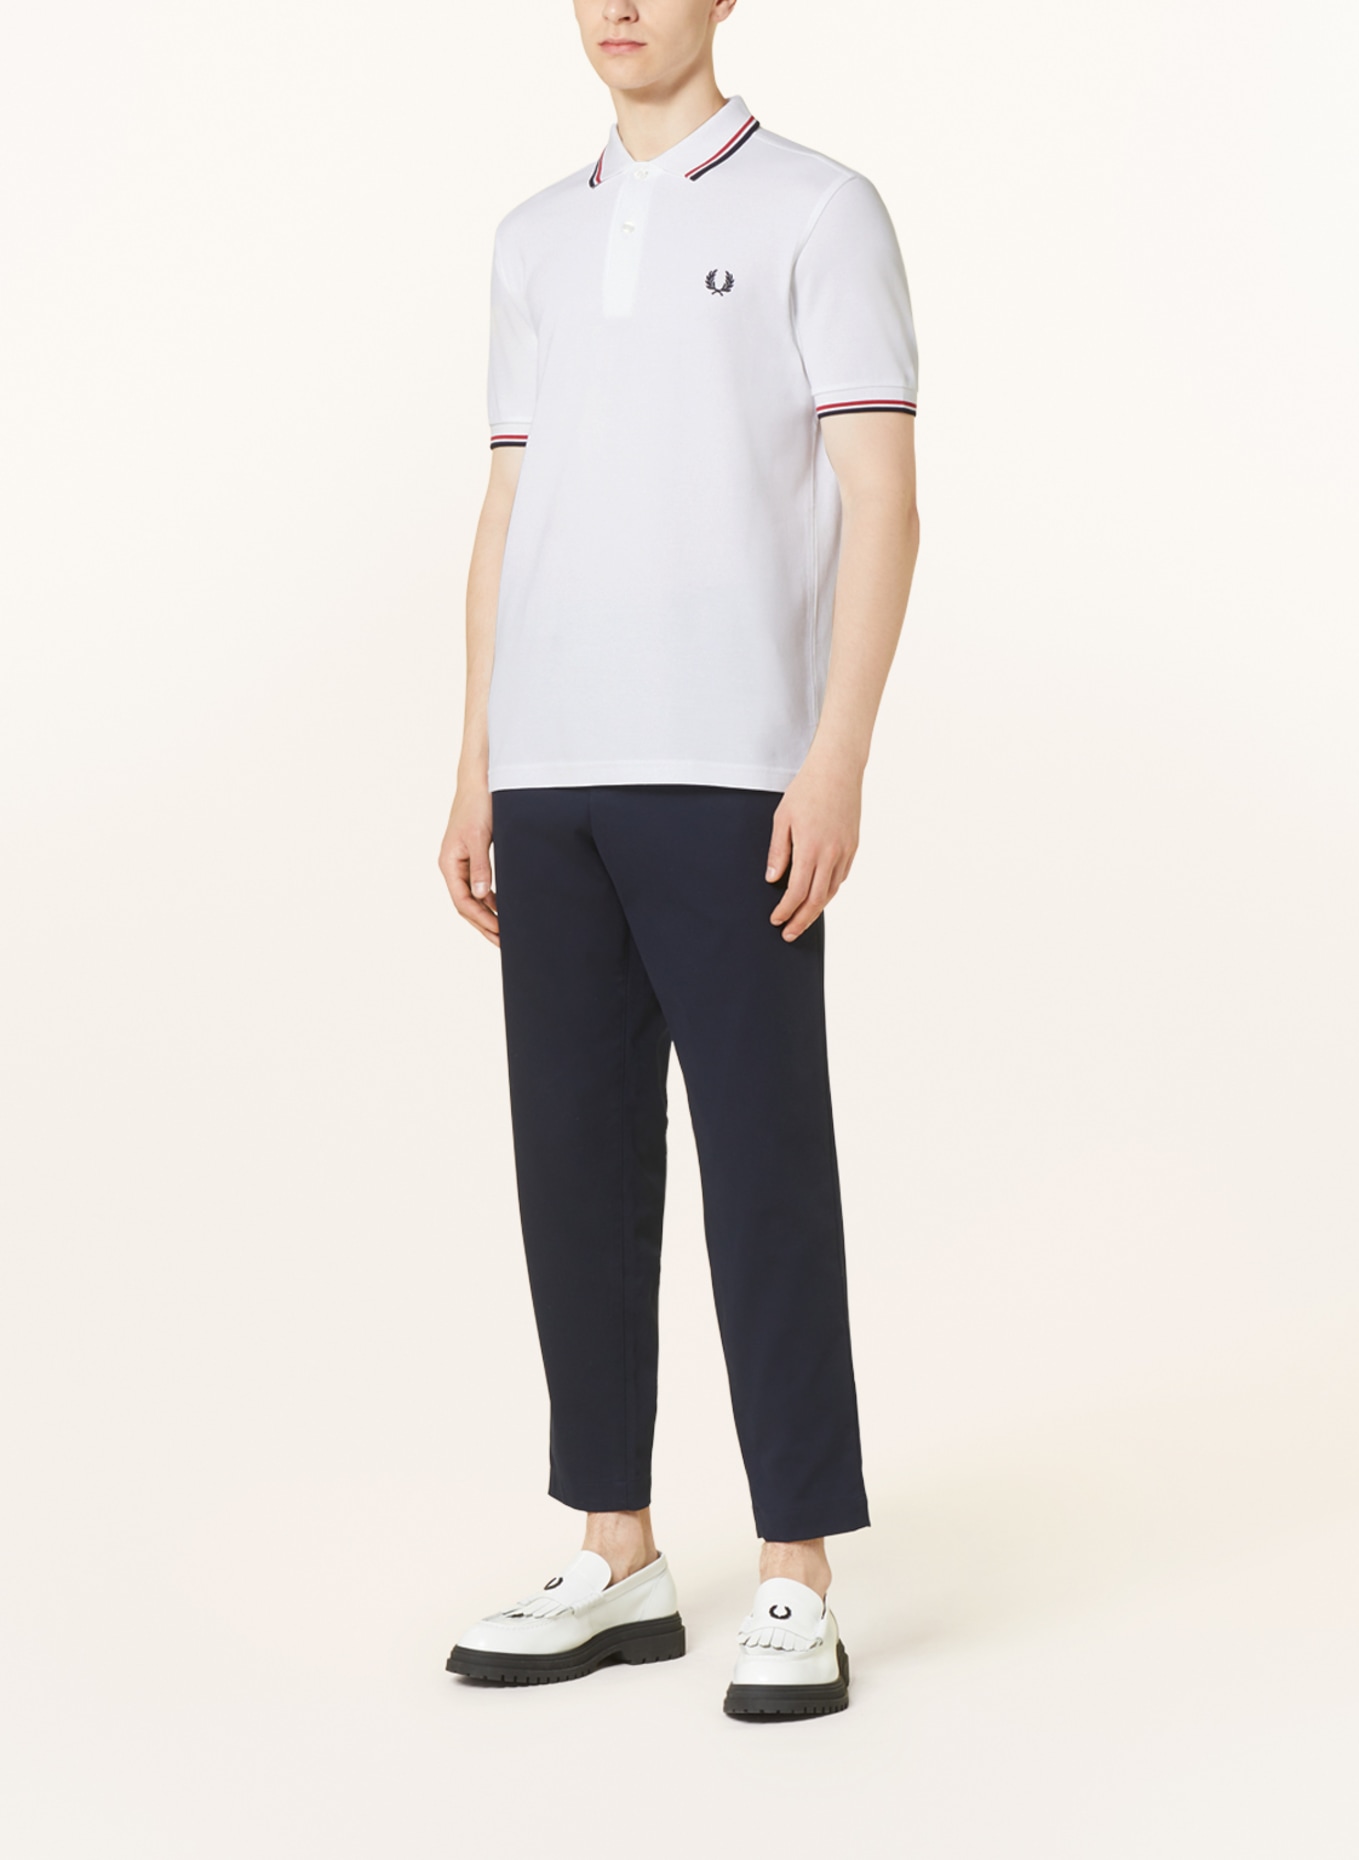 FRED PERRY Piqué-Poloshirt M3600 Straight Fit, Farbe: WEISS (Bild 2)